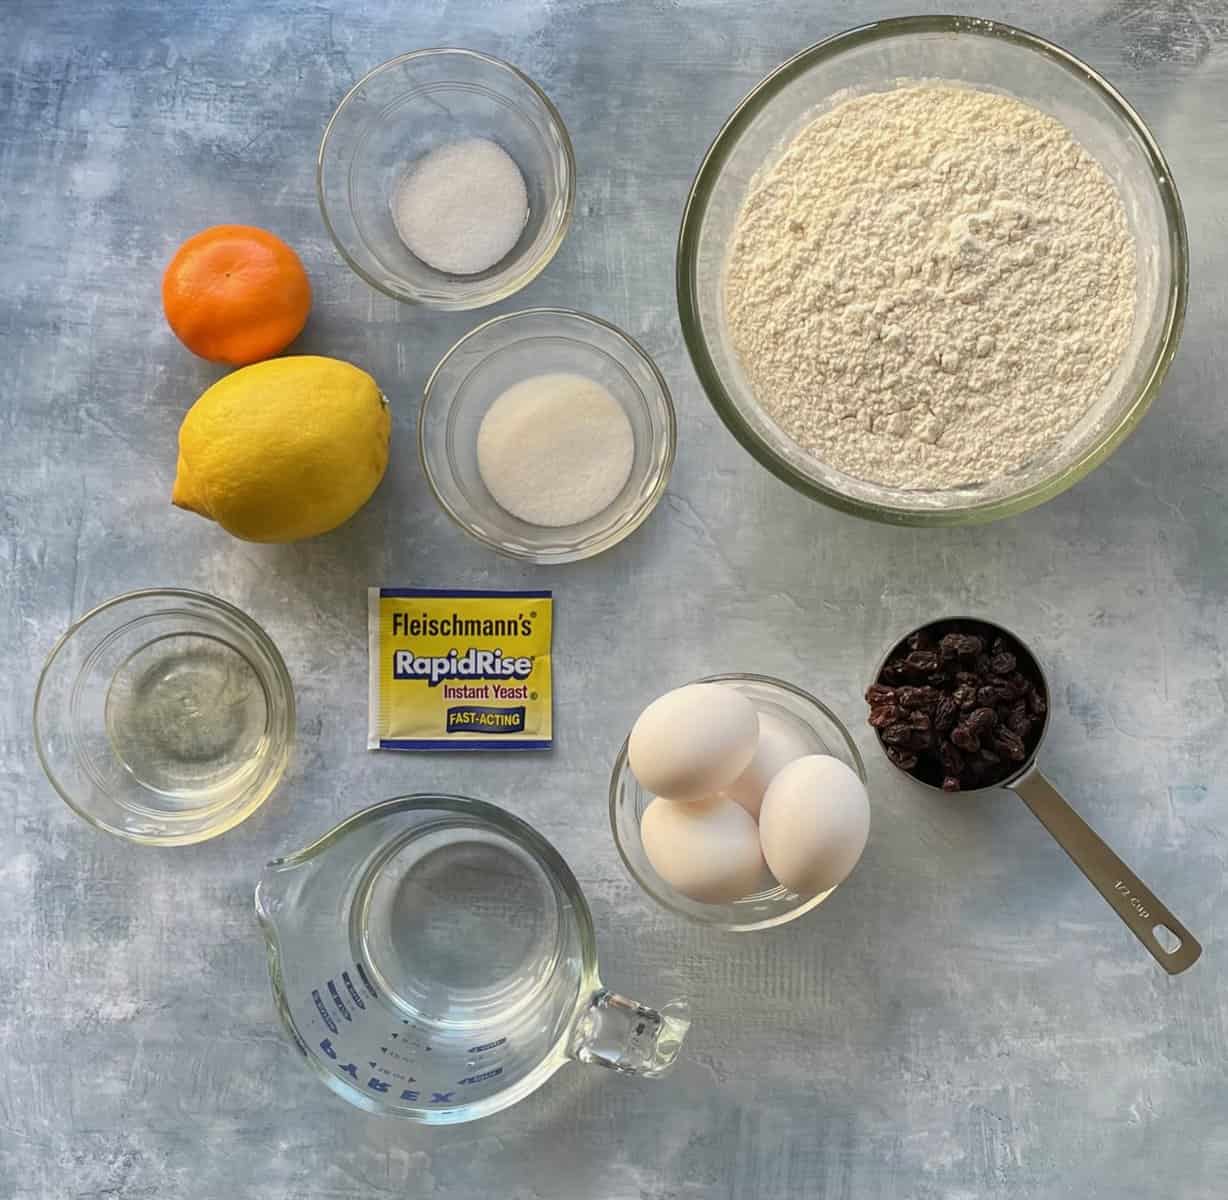 orange, lemon, and other ingredients for the raisin challah on a countertop.